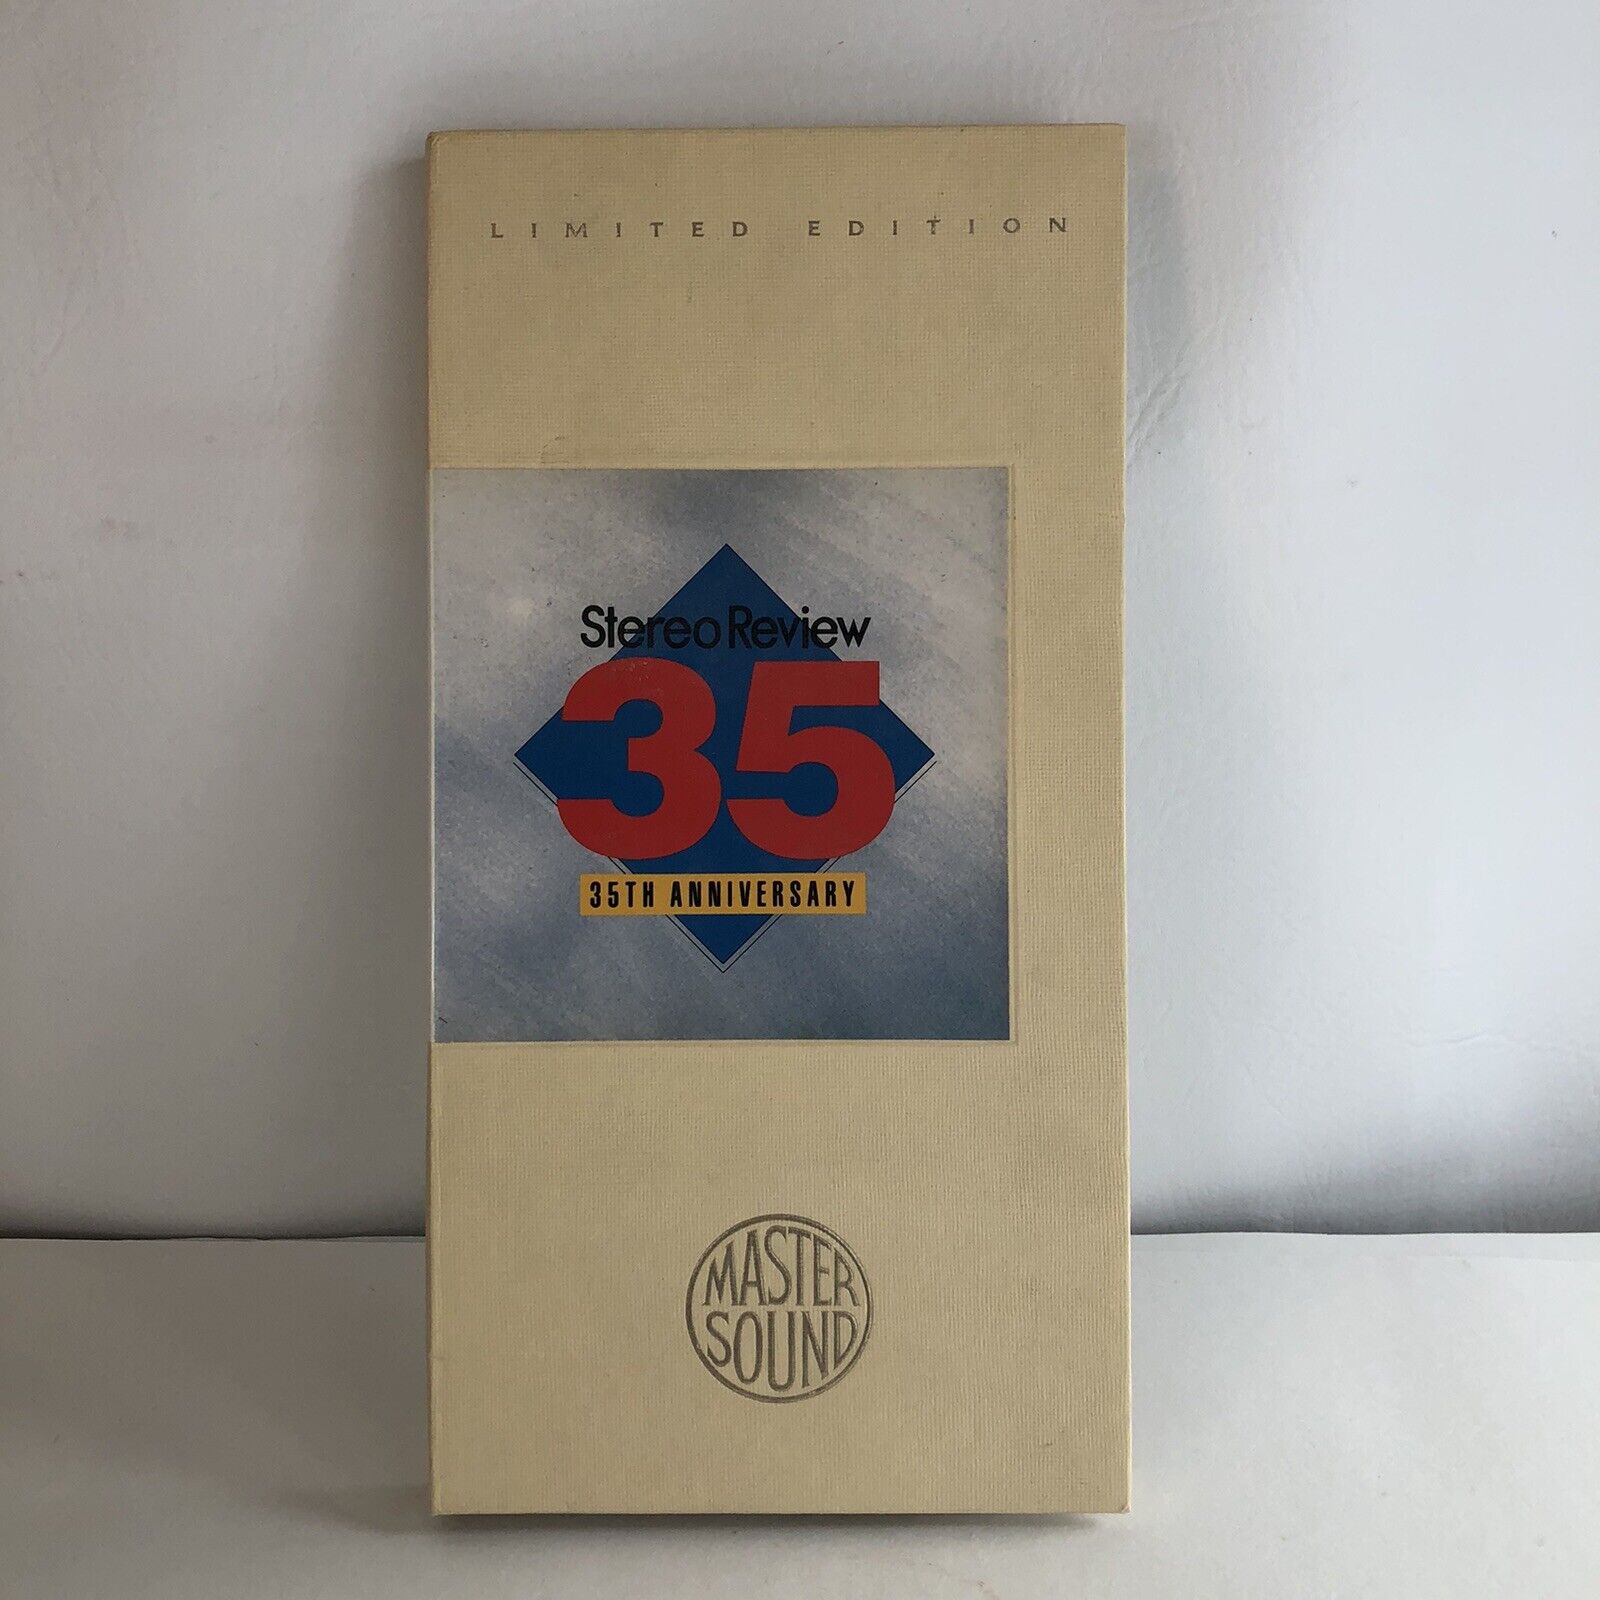 STEREO REVIEW 35th Anniversary Limited Edition Master Sound 24k Gold CD